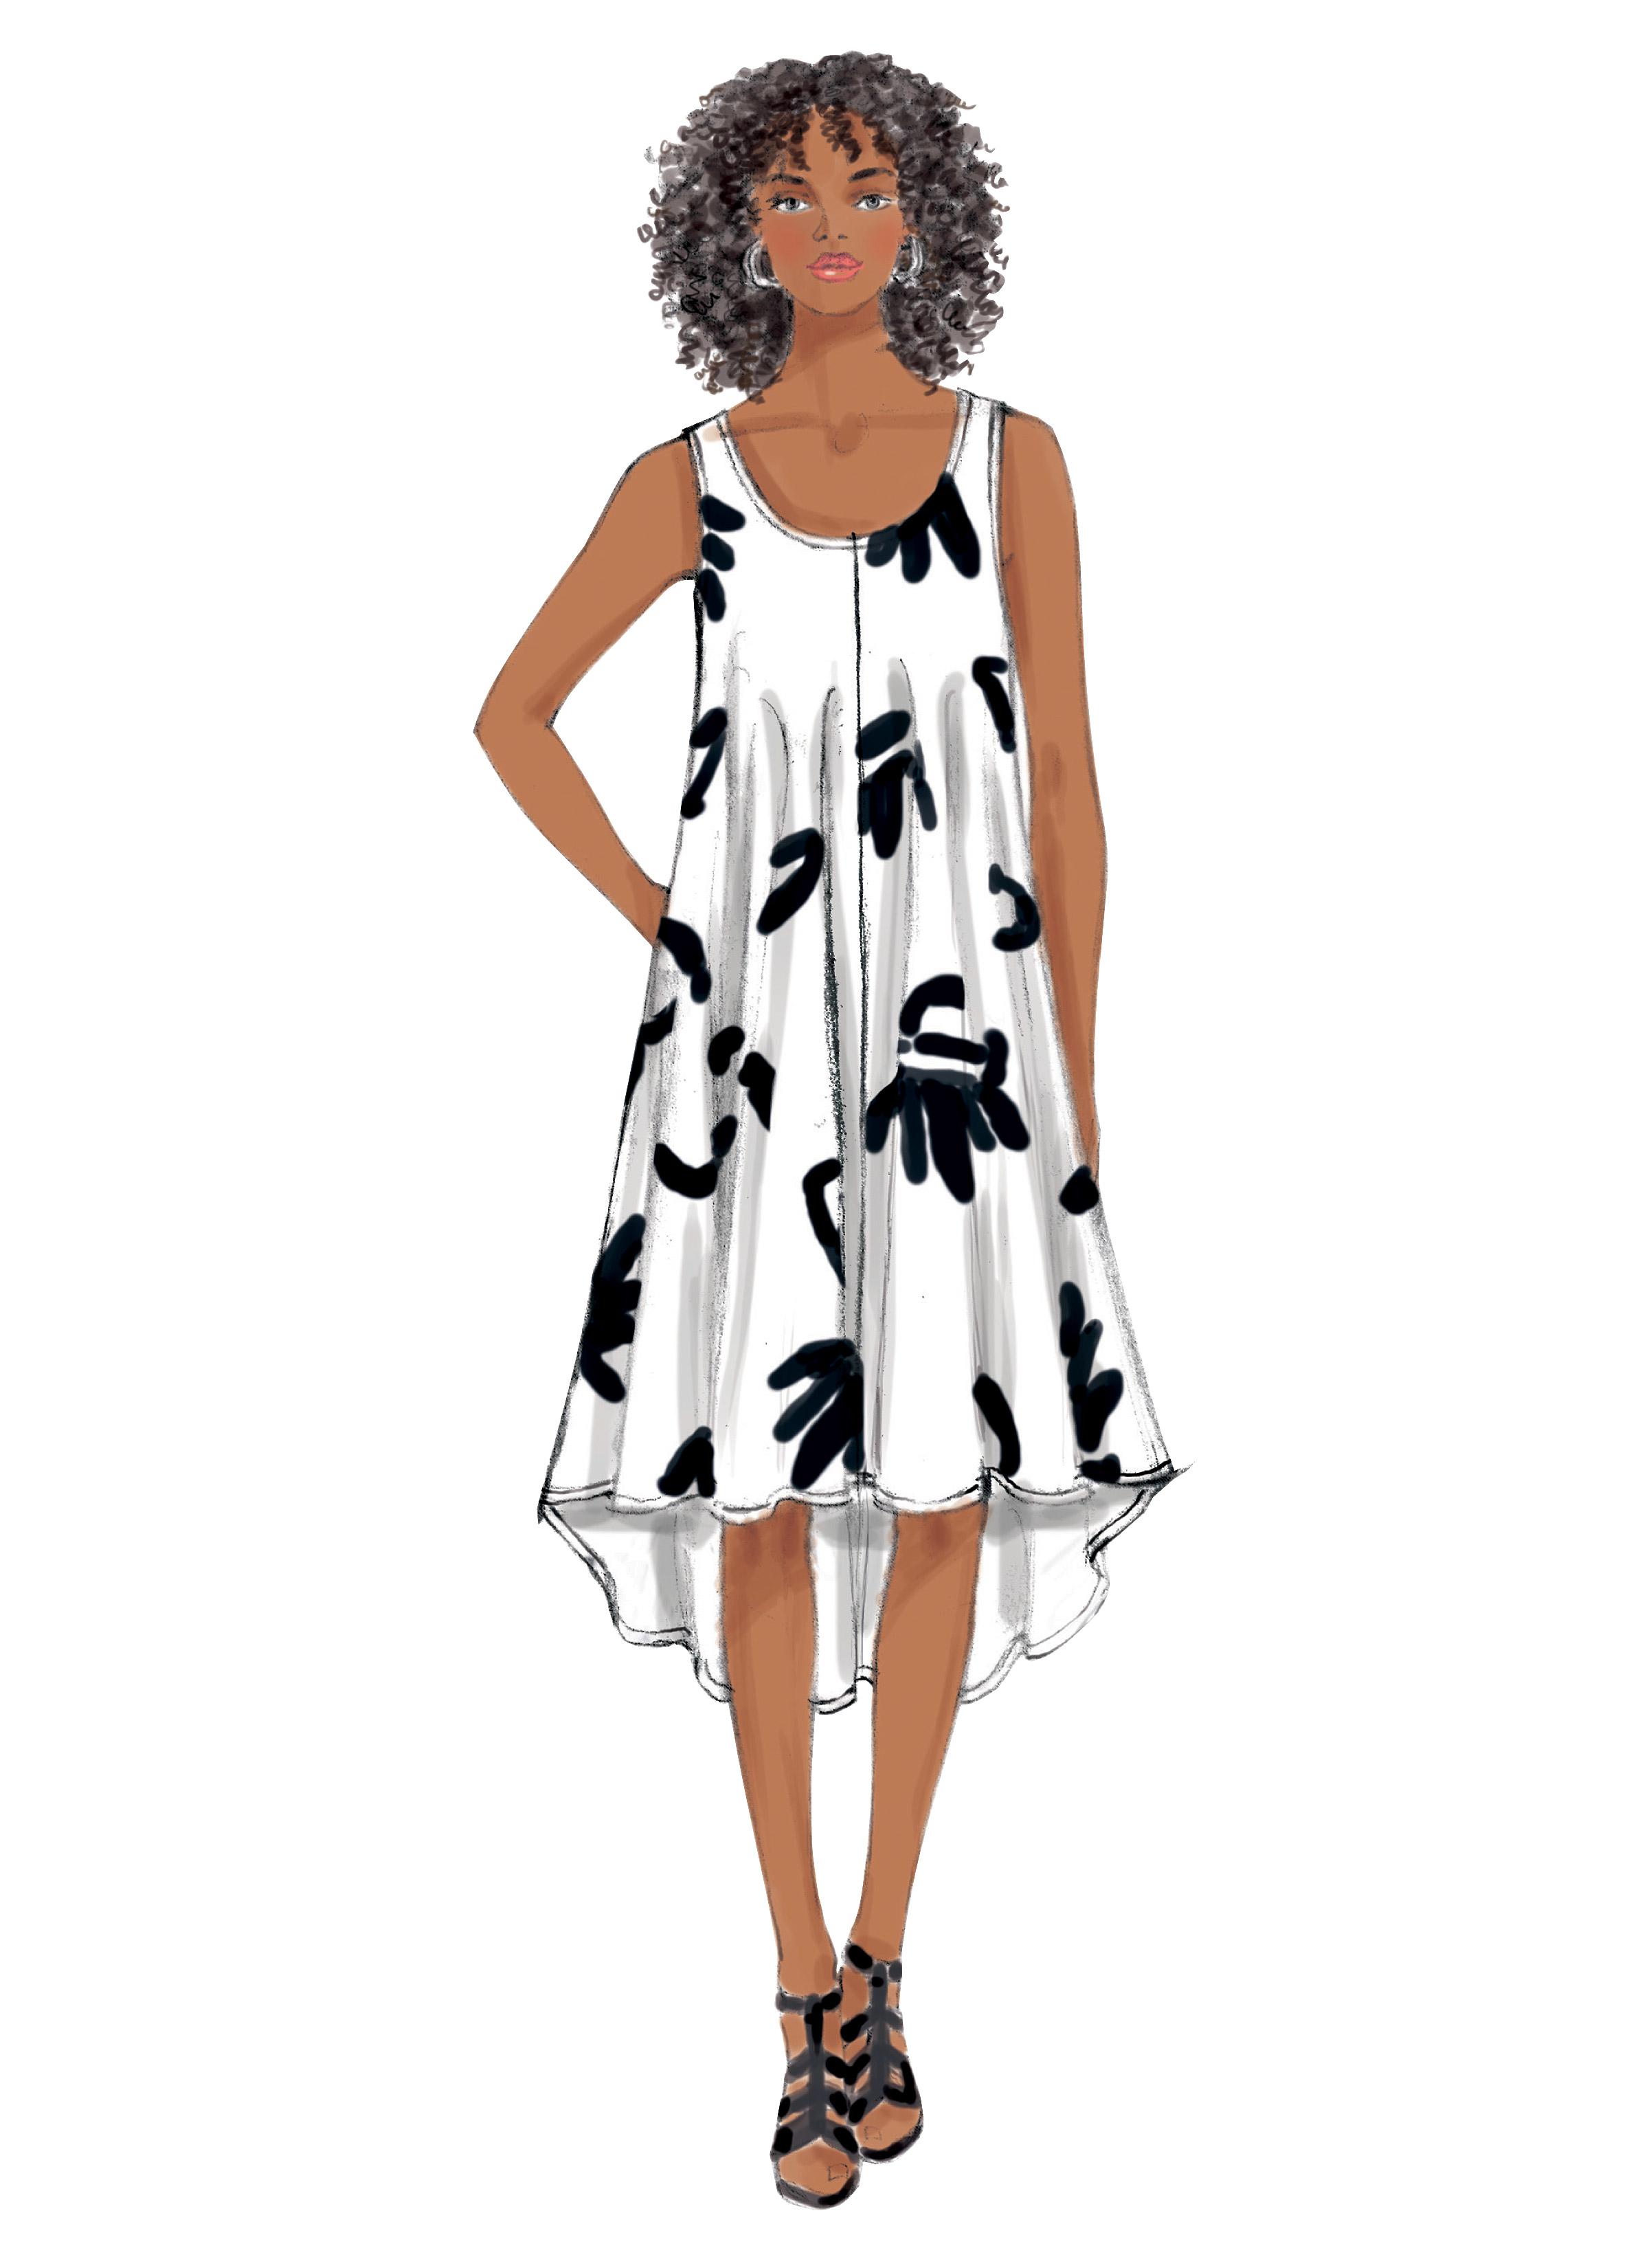 Butterick B6350 Misses' Sleeveless and Cold Shoulder Dresses